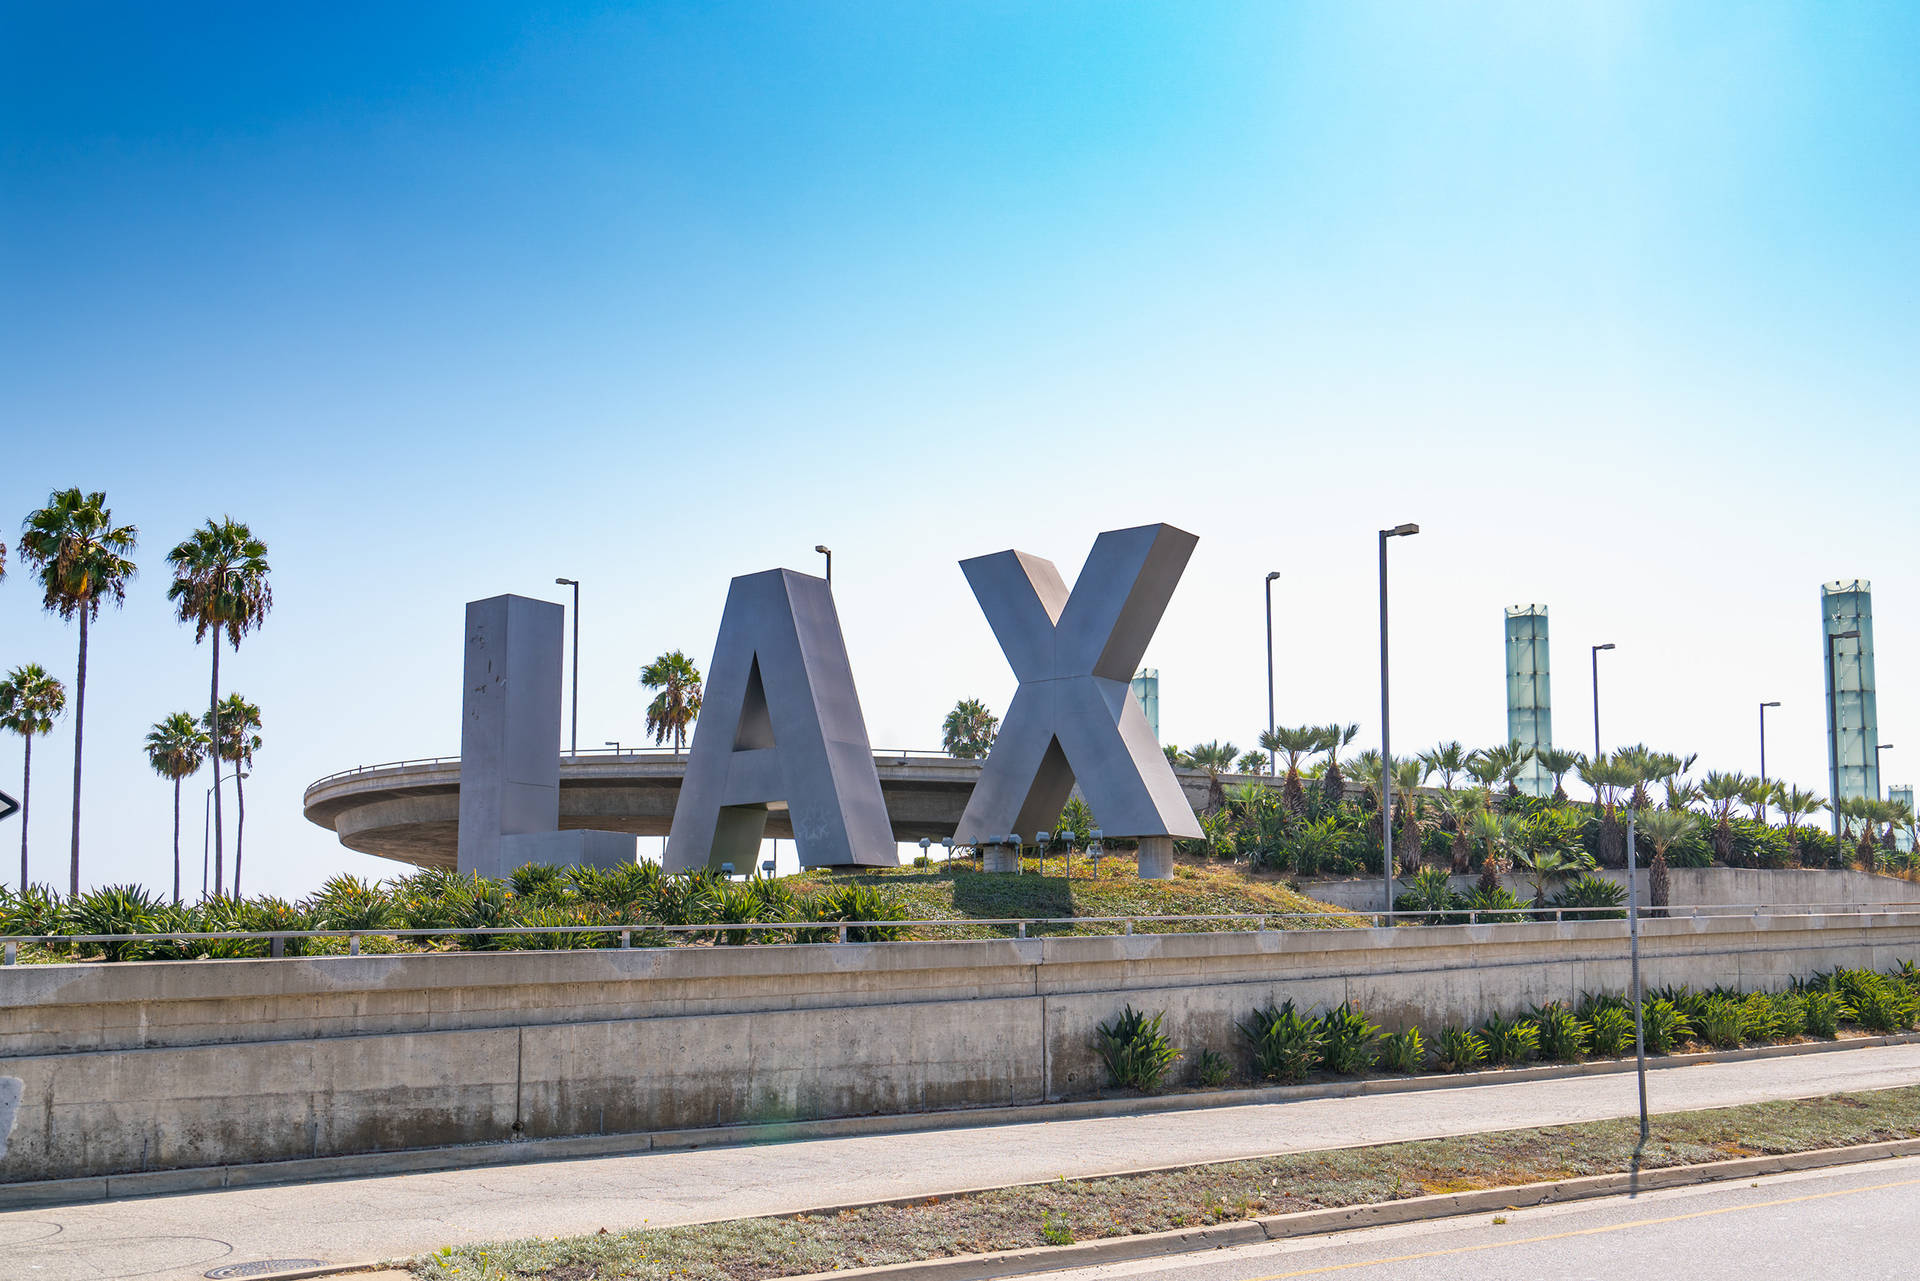 View of Lax signage against a clear blue sky Wallpaper